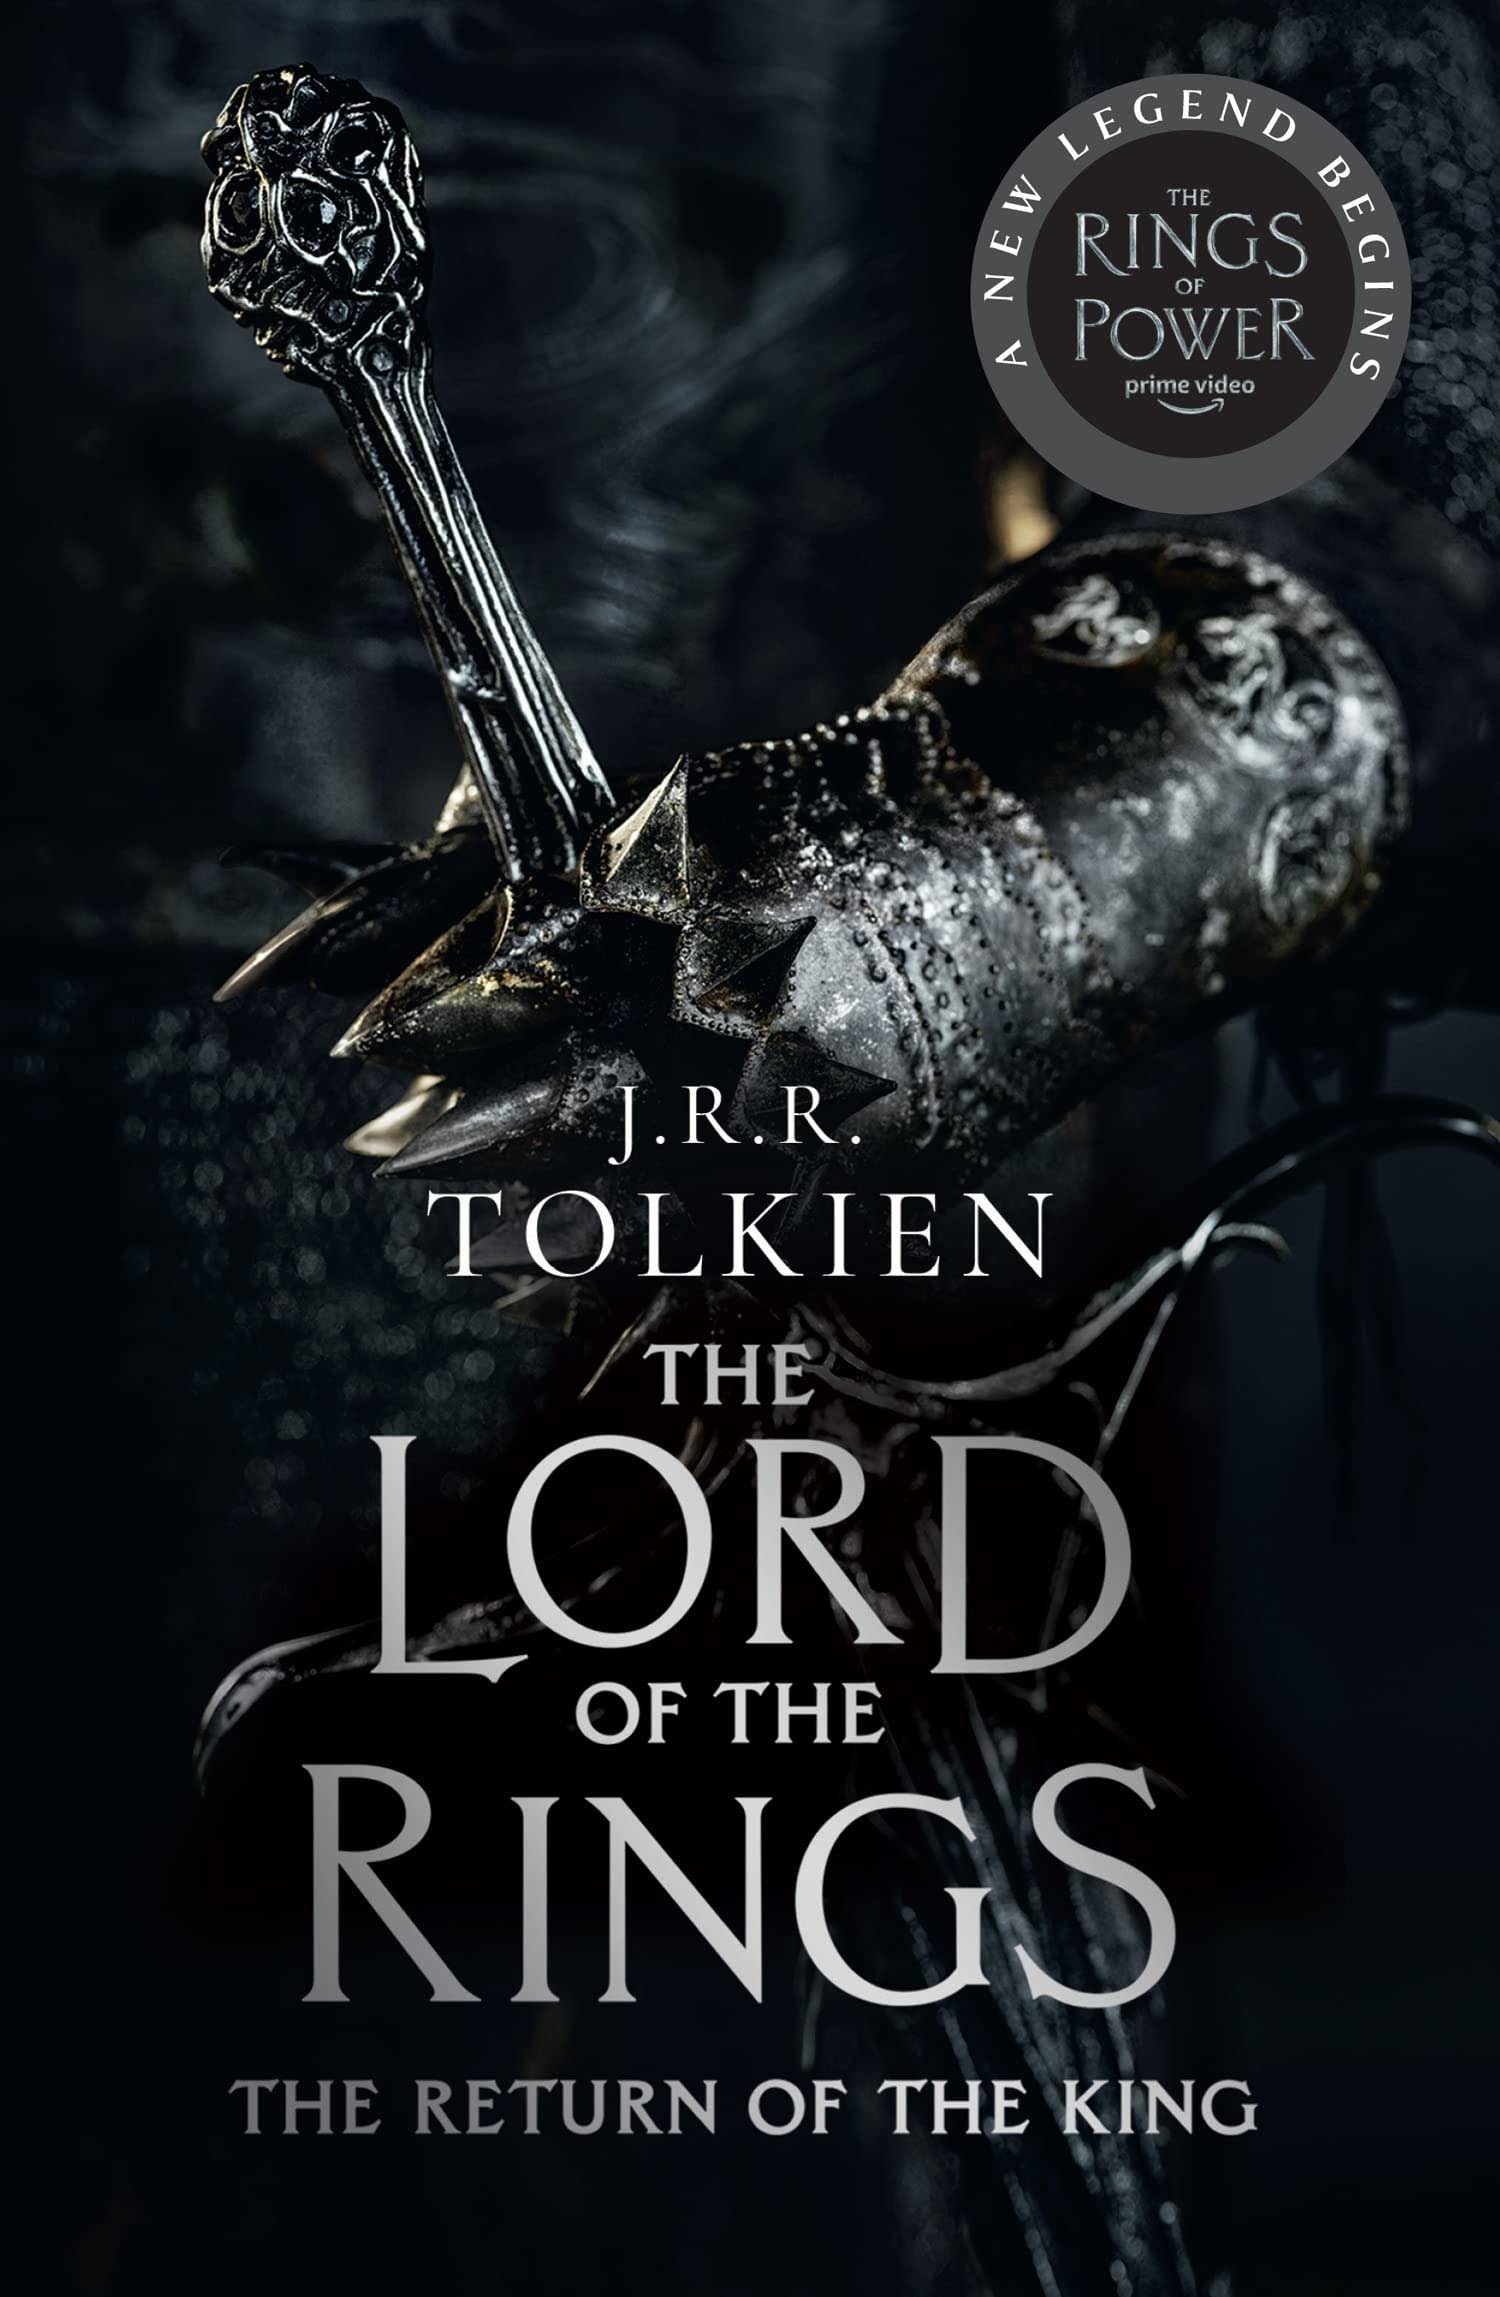 The Return of The King by J R R Tolkien